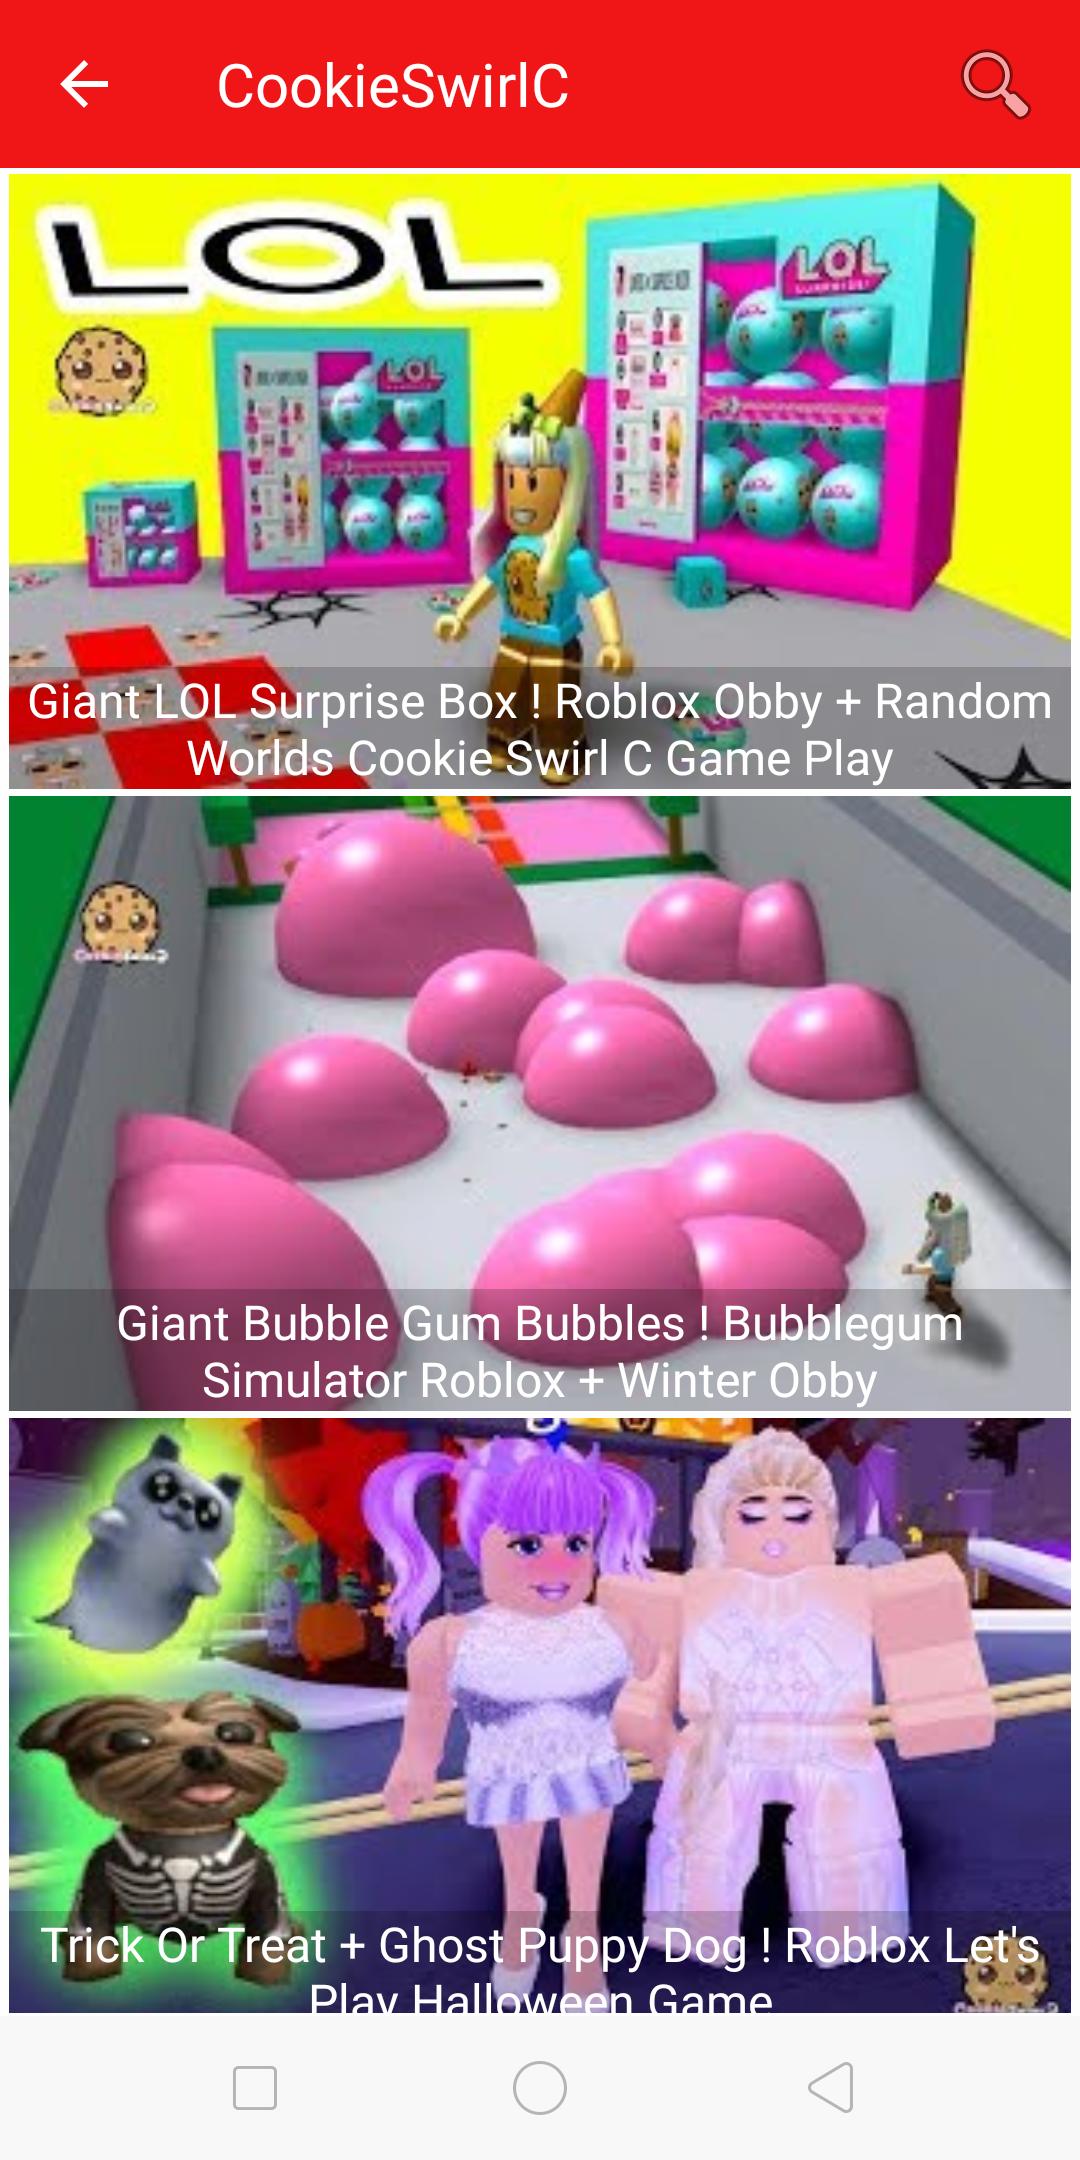 Crazy Cookie World Swirl Videos For Android Apk Download - worlds made for me roblox obby random world cookie swirl c